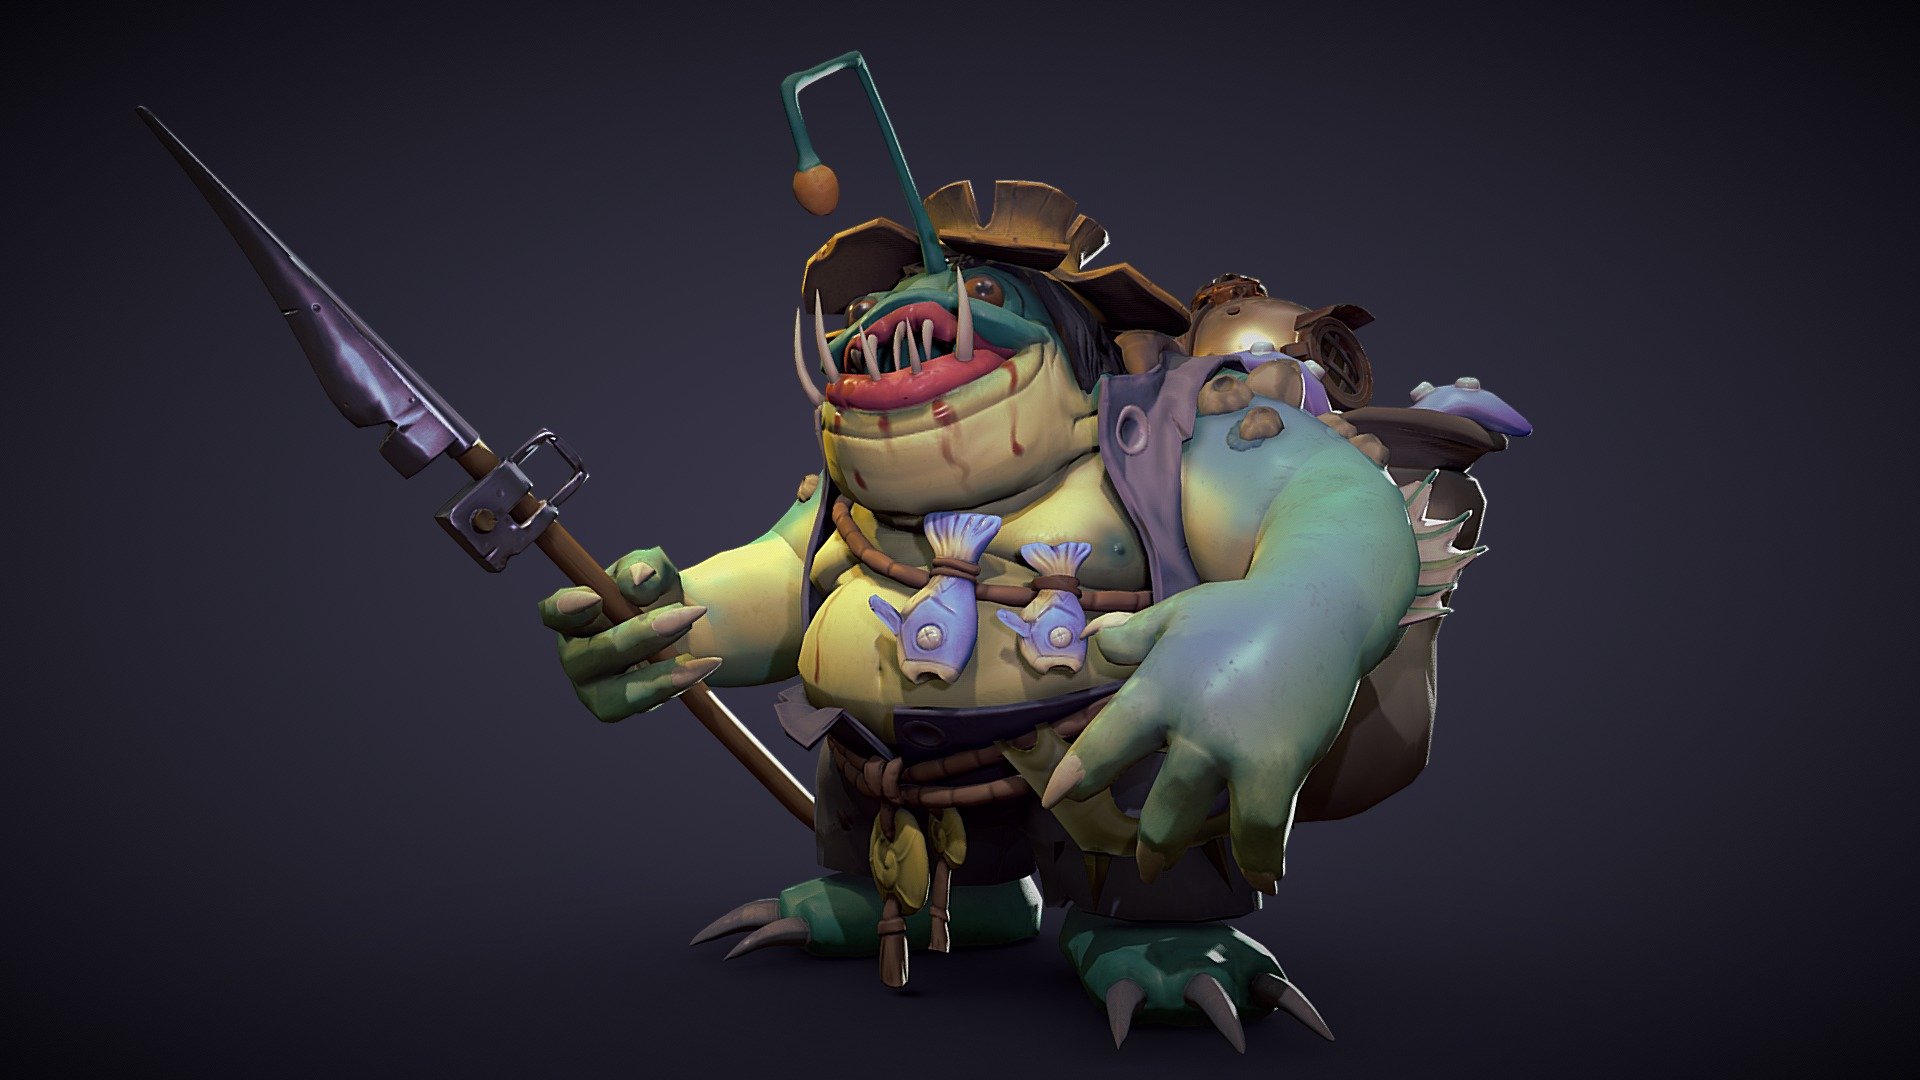 A character made for the Stylized Creation course at Howest DAE with a PBR workflow - DeepSea Fishman Character - 3D model by JordyConaert 3d model